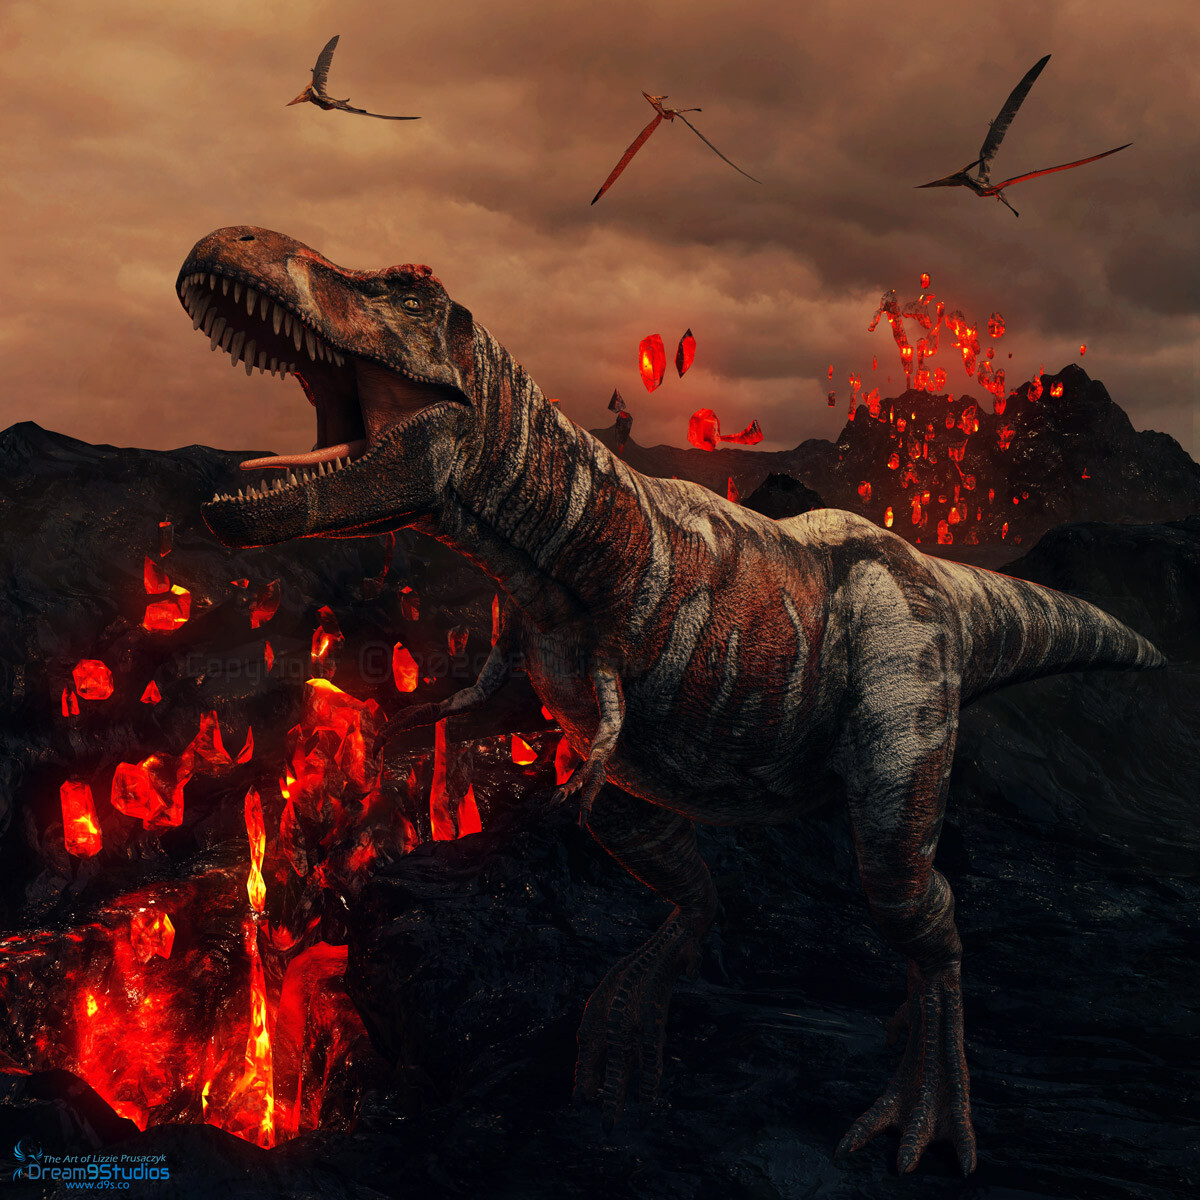 The massive Tyrannosaur is on the hunt through the volcanic landscape as the Pteranodons fly carefully above waiting to pick clean the scraps.